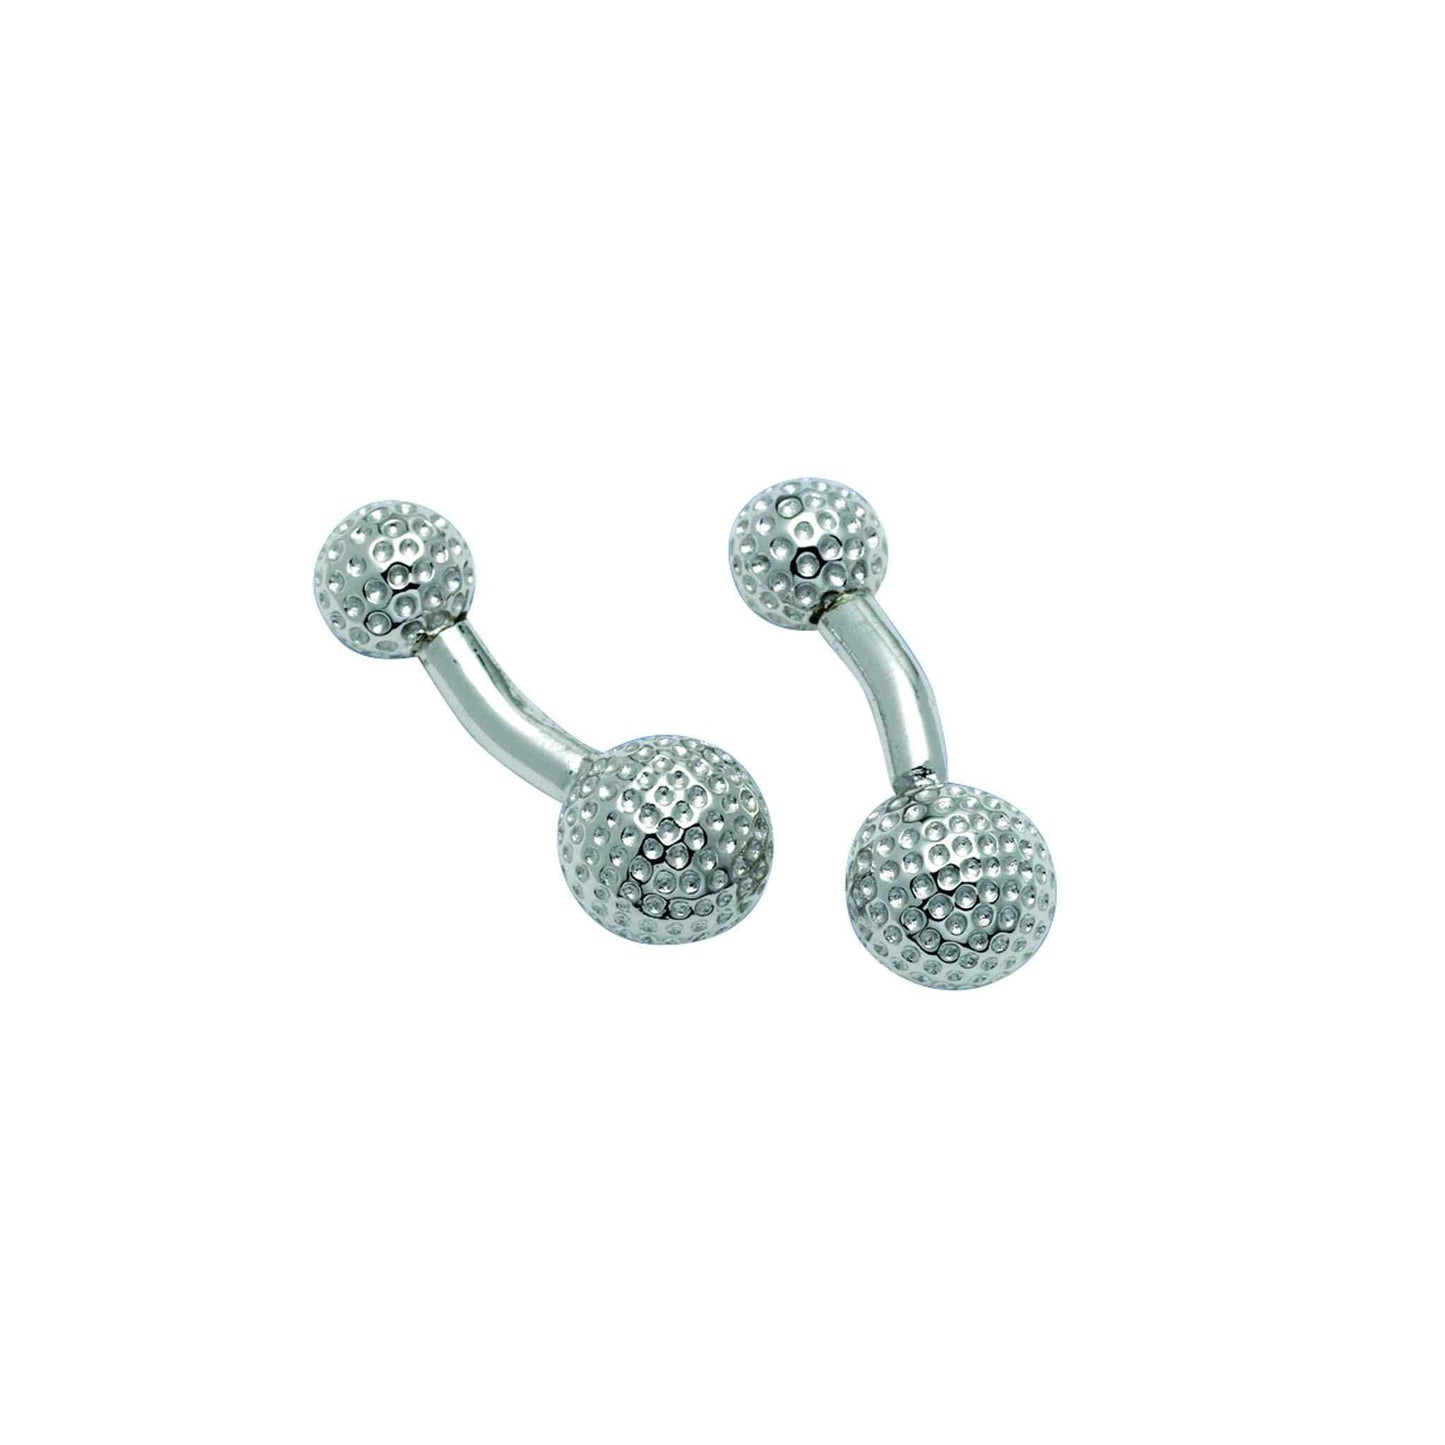 A golf ball sterling silver cufflinks displayed on a neutral white background.